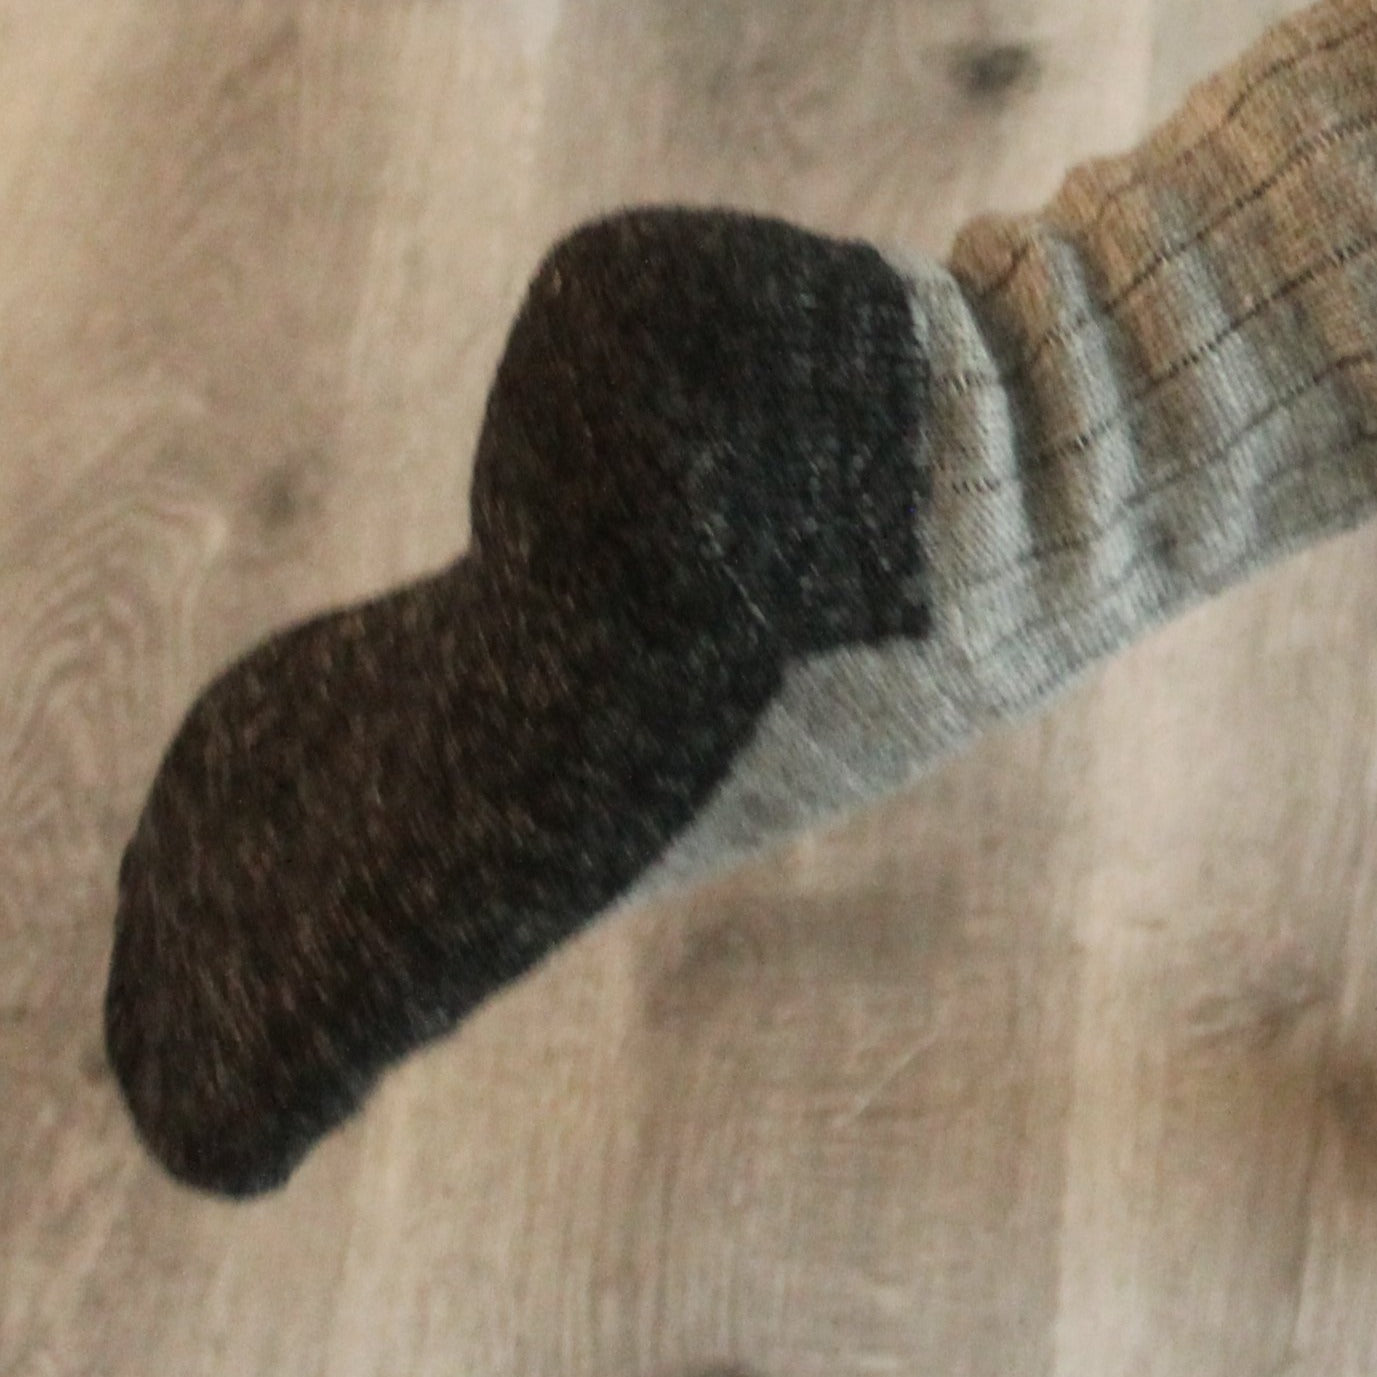 Moisture-Wicking Socks for winter hiking outfit - Theunstitchd